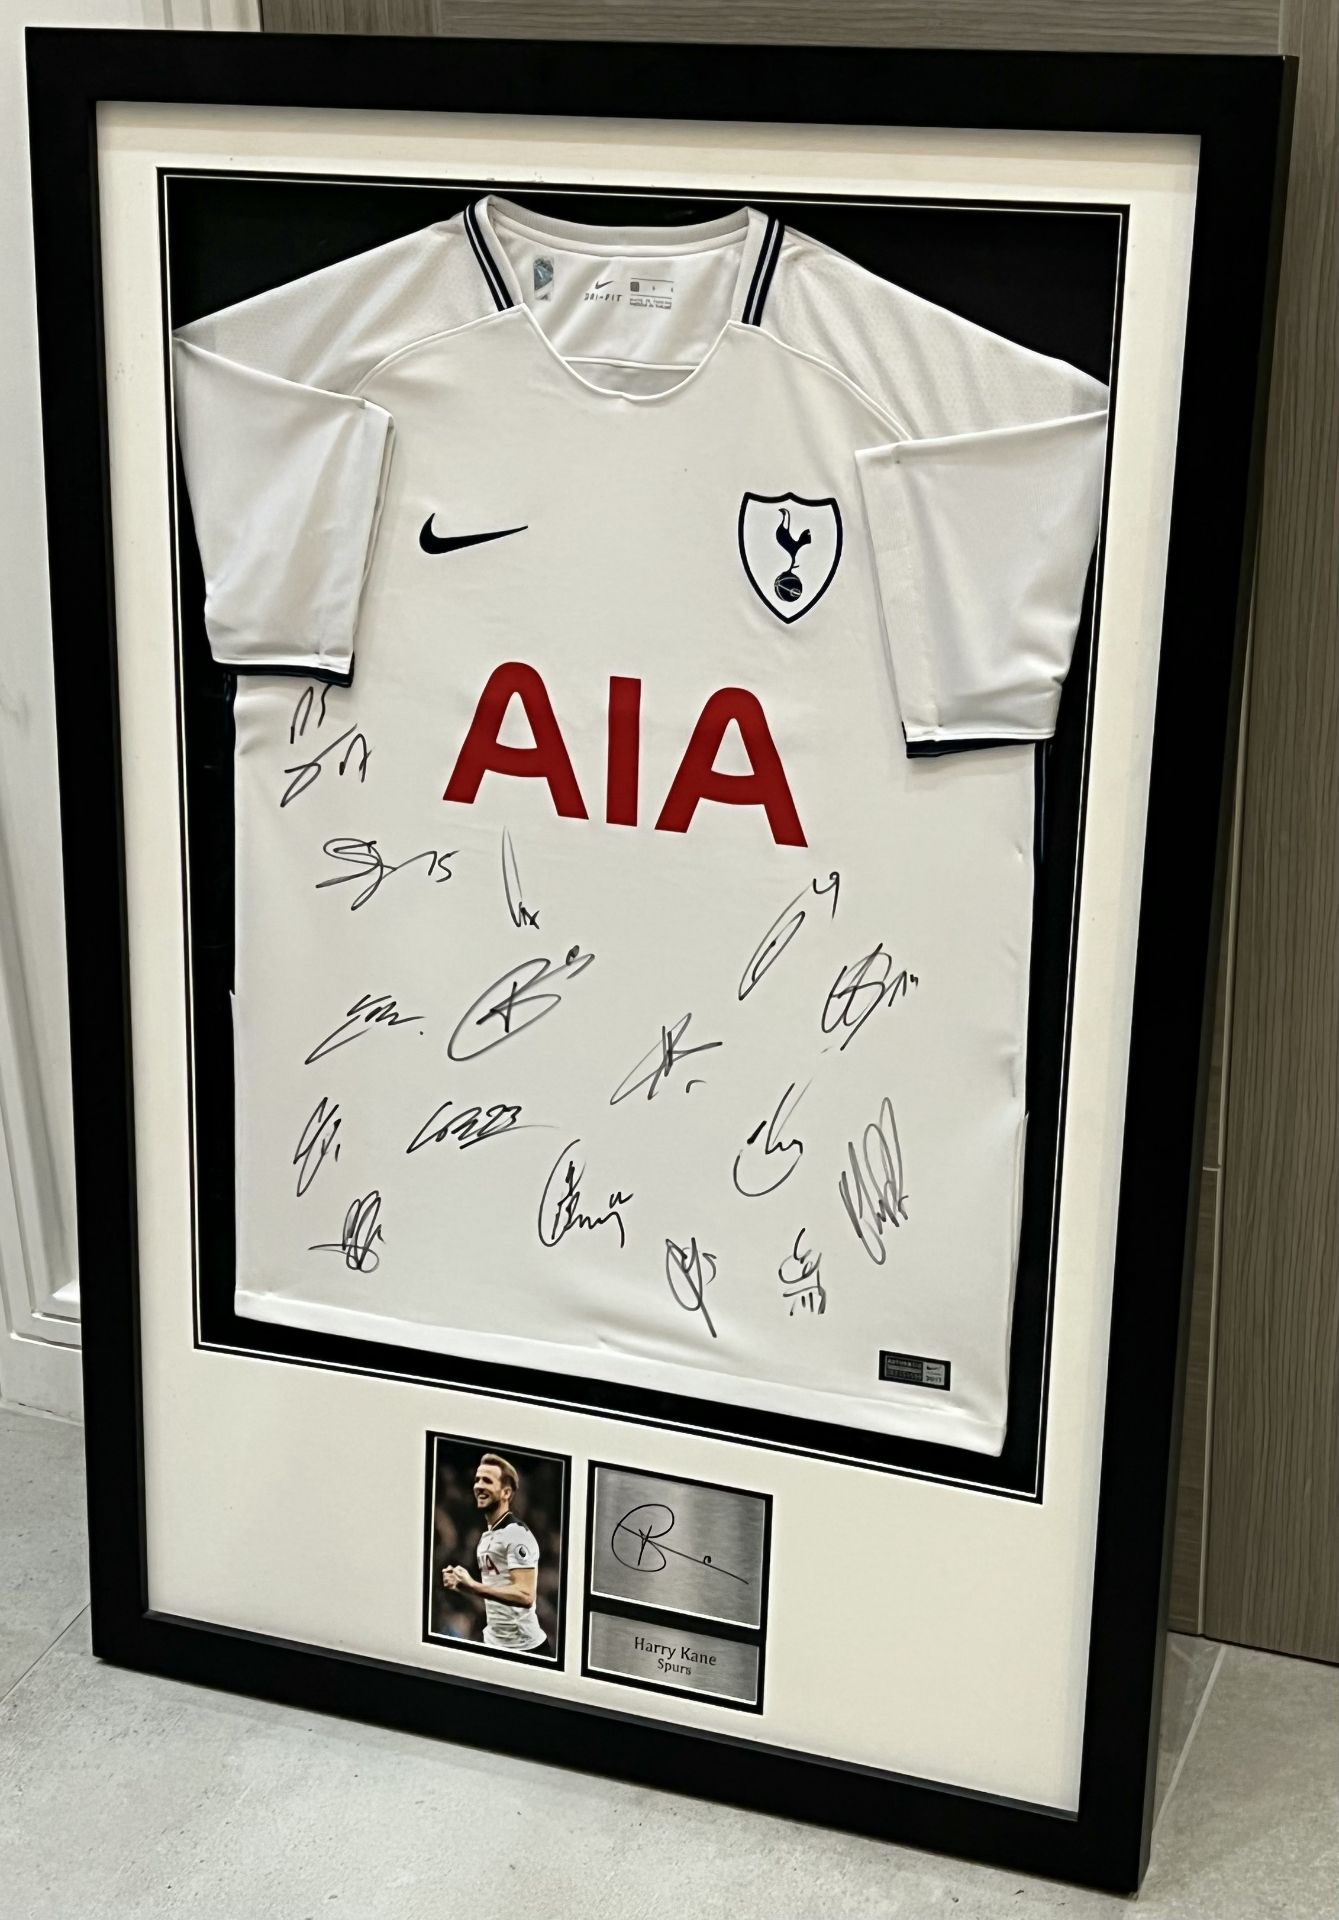 Authentic Tottenham Hotspur hand signed shirt display from the season 2017-18. The 17 signatories - Image 3 of 12